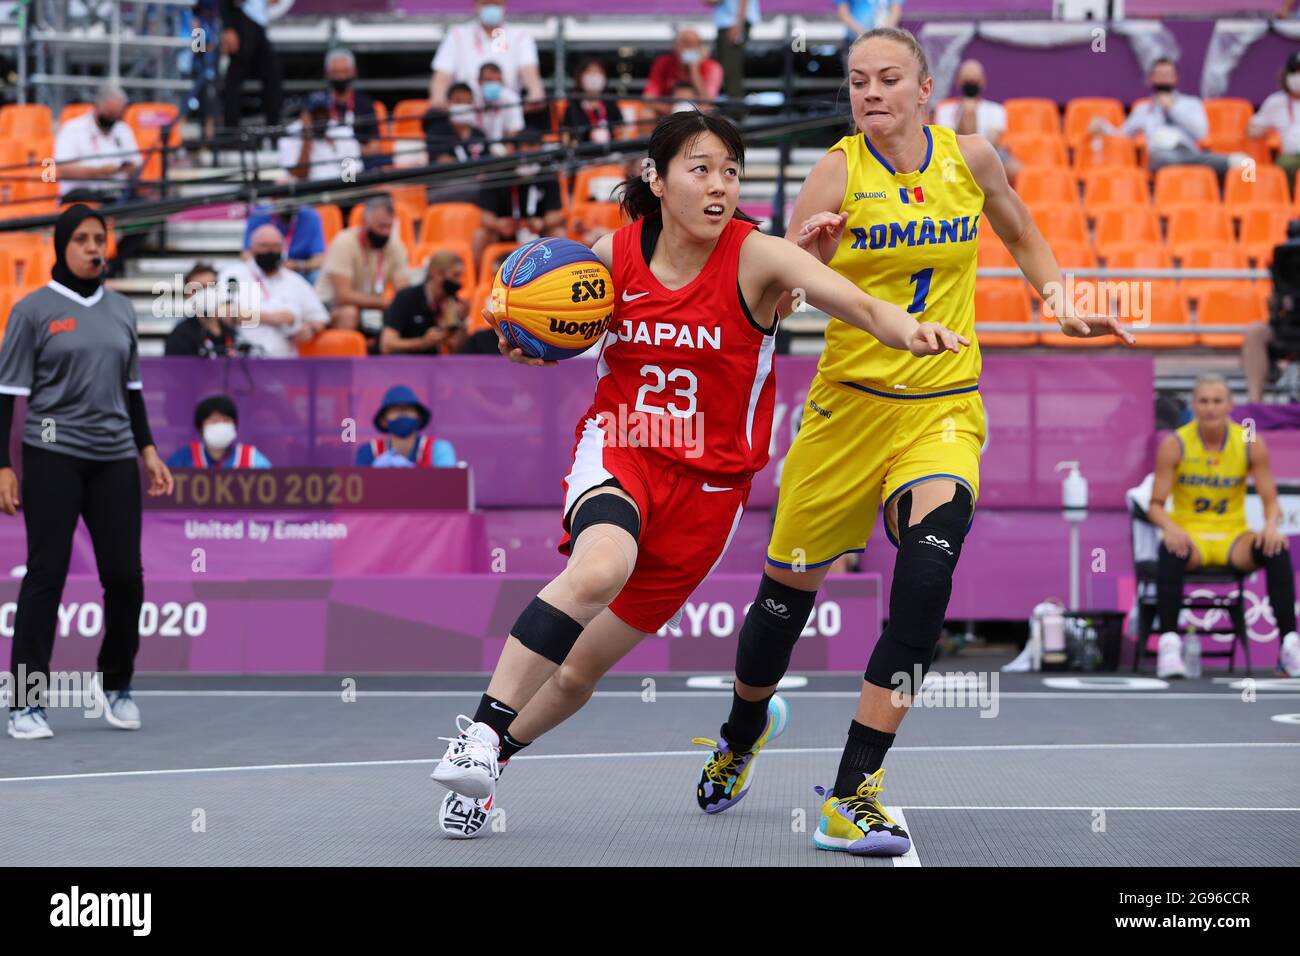 Tokyo Japan 24th July 21 L R Mai Yamamoto Jpn Claudia Cuic Rou 3x3 Basketball Women S Pool Round Match Between Roc Japan During The Tokyo Olympic Games At The Aomi